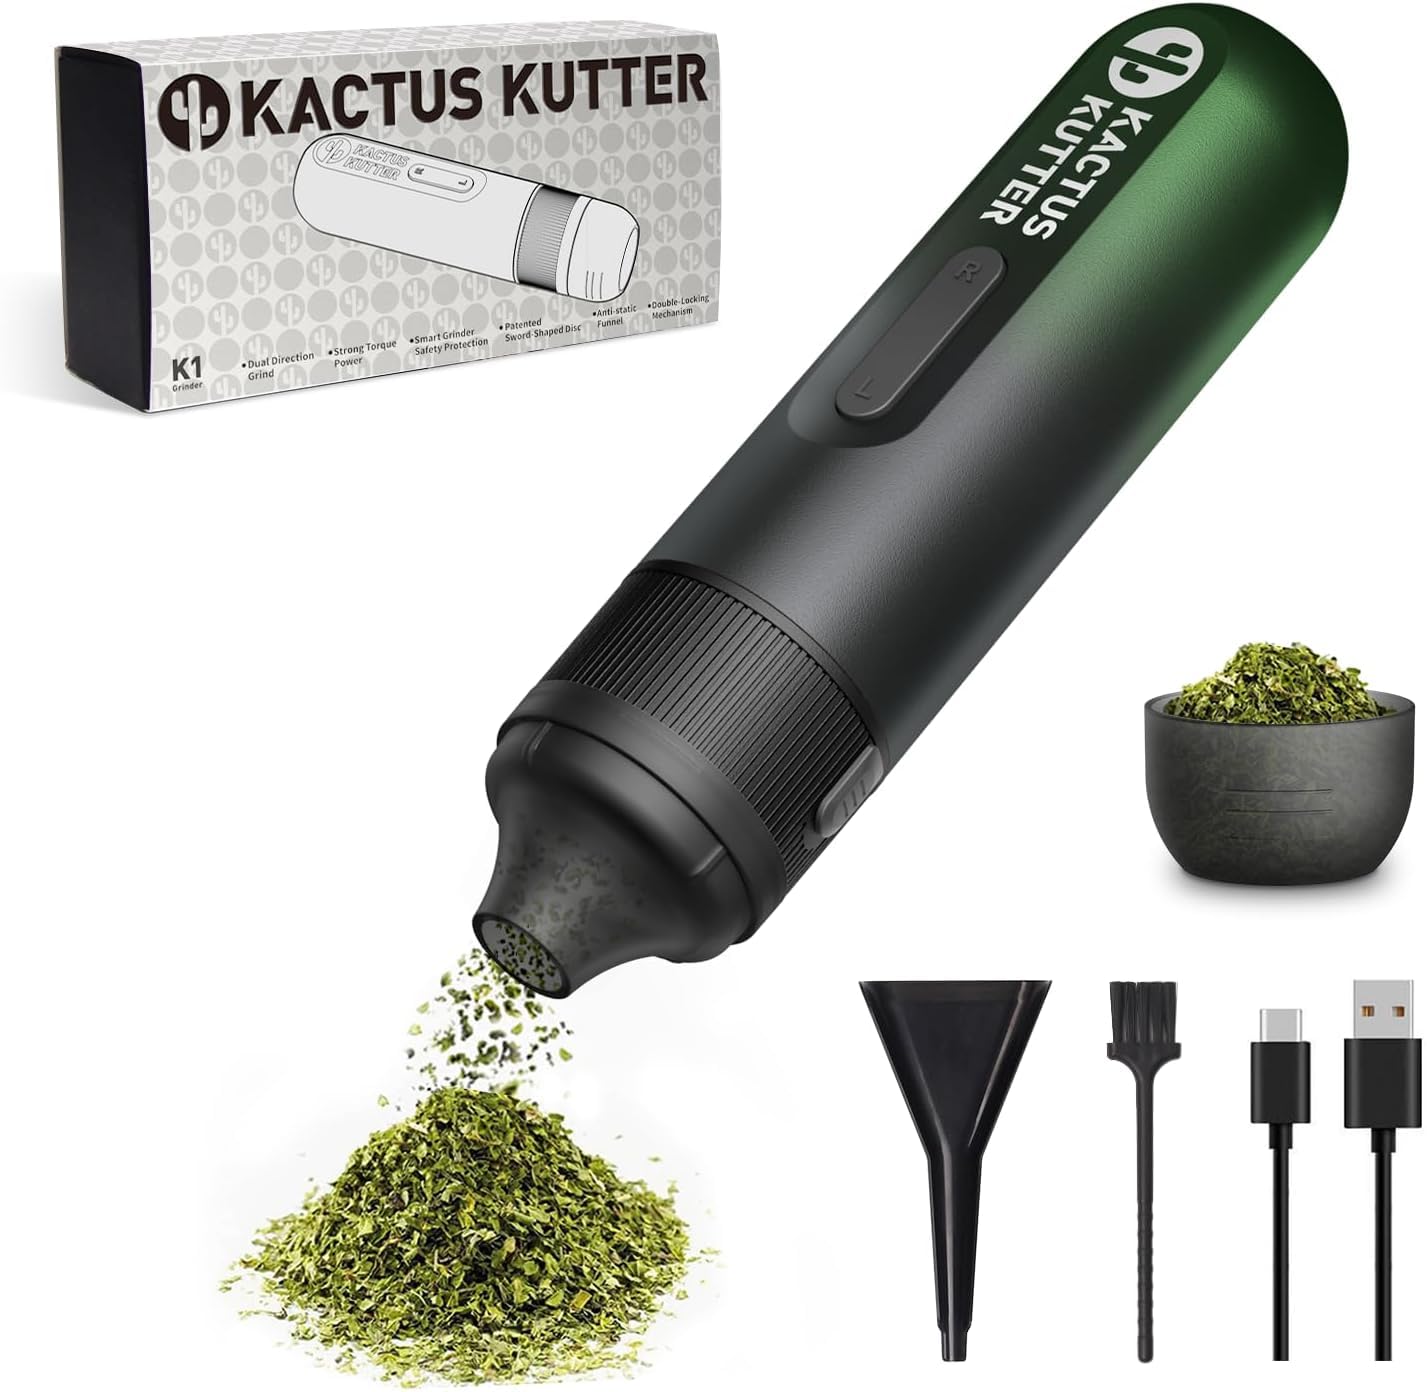 A black and green herb grinder with accessories and packaging.